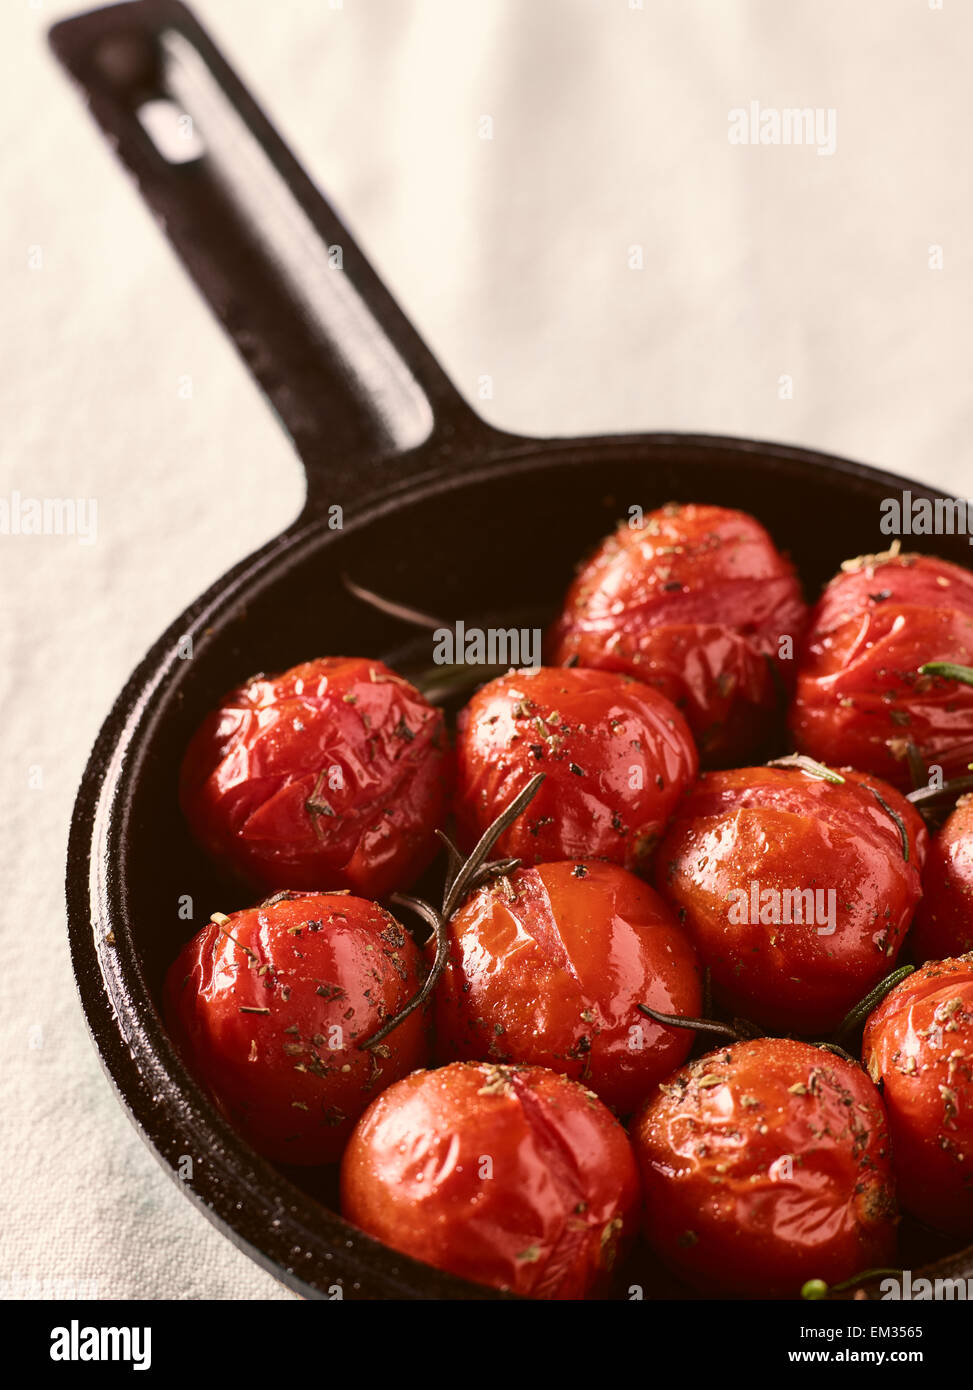 Grilled cherry tomatoes in a small cast iron pot, rosemary, vertical image Stock Photo